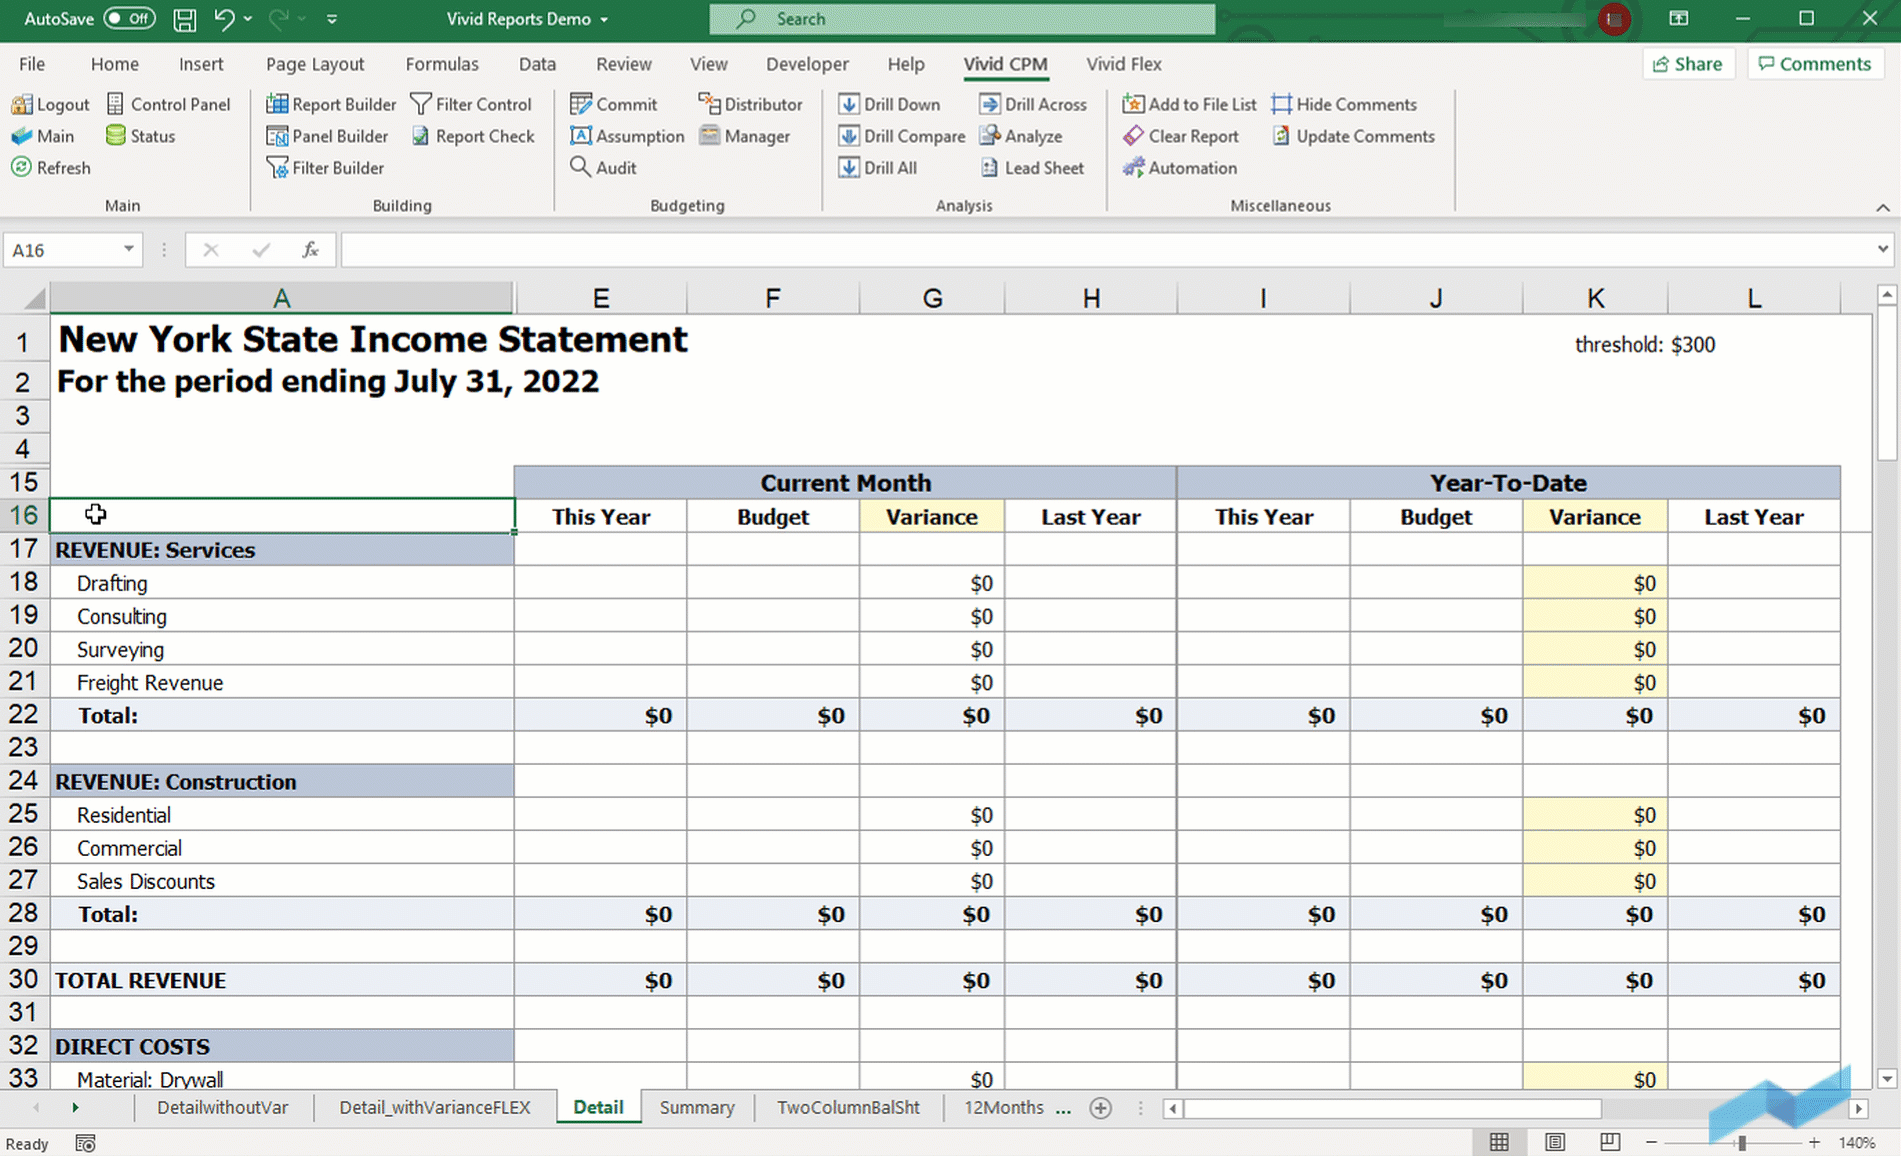 Vivid Reports does not use Excel formula